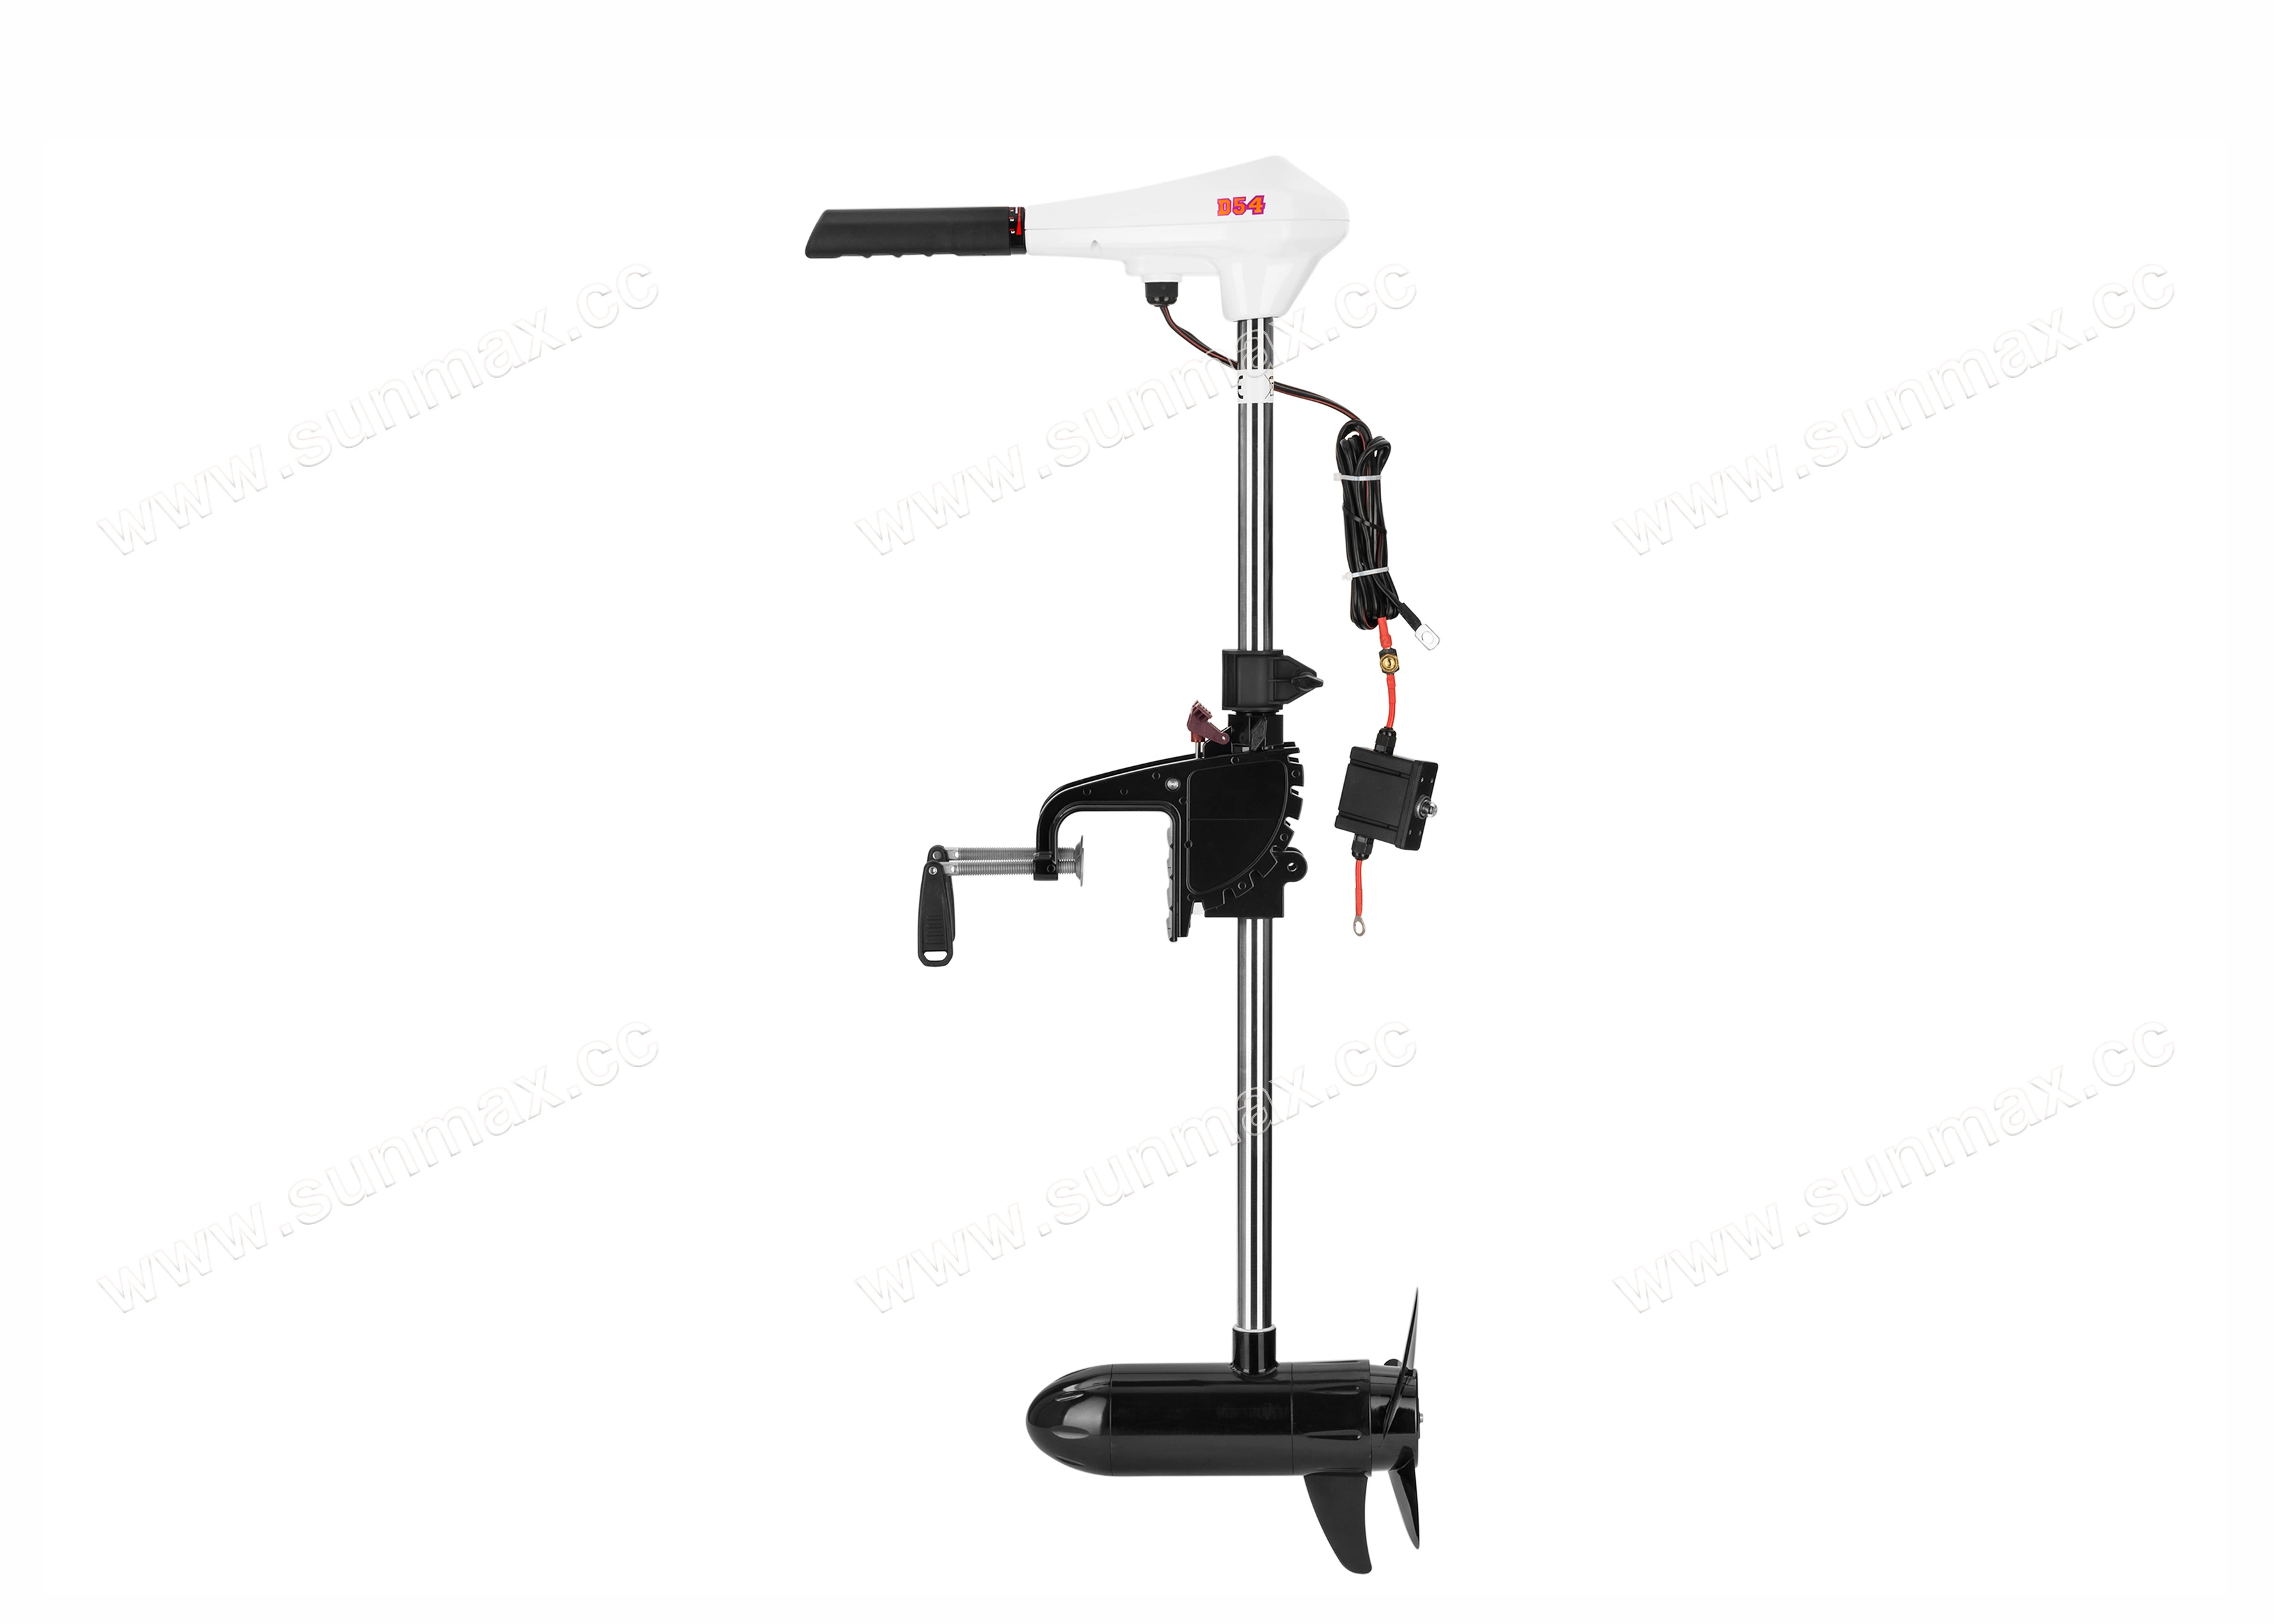 Haibo D Series Hand Control Electric Trolling Motor D54